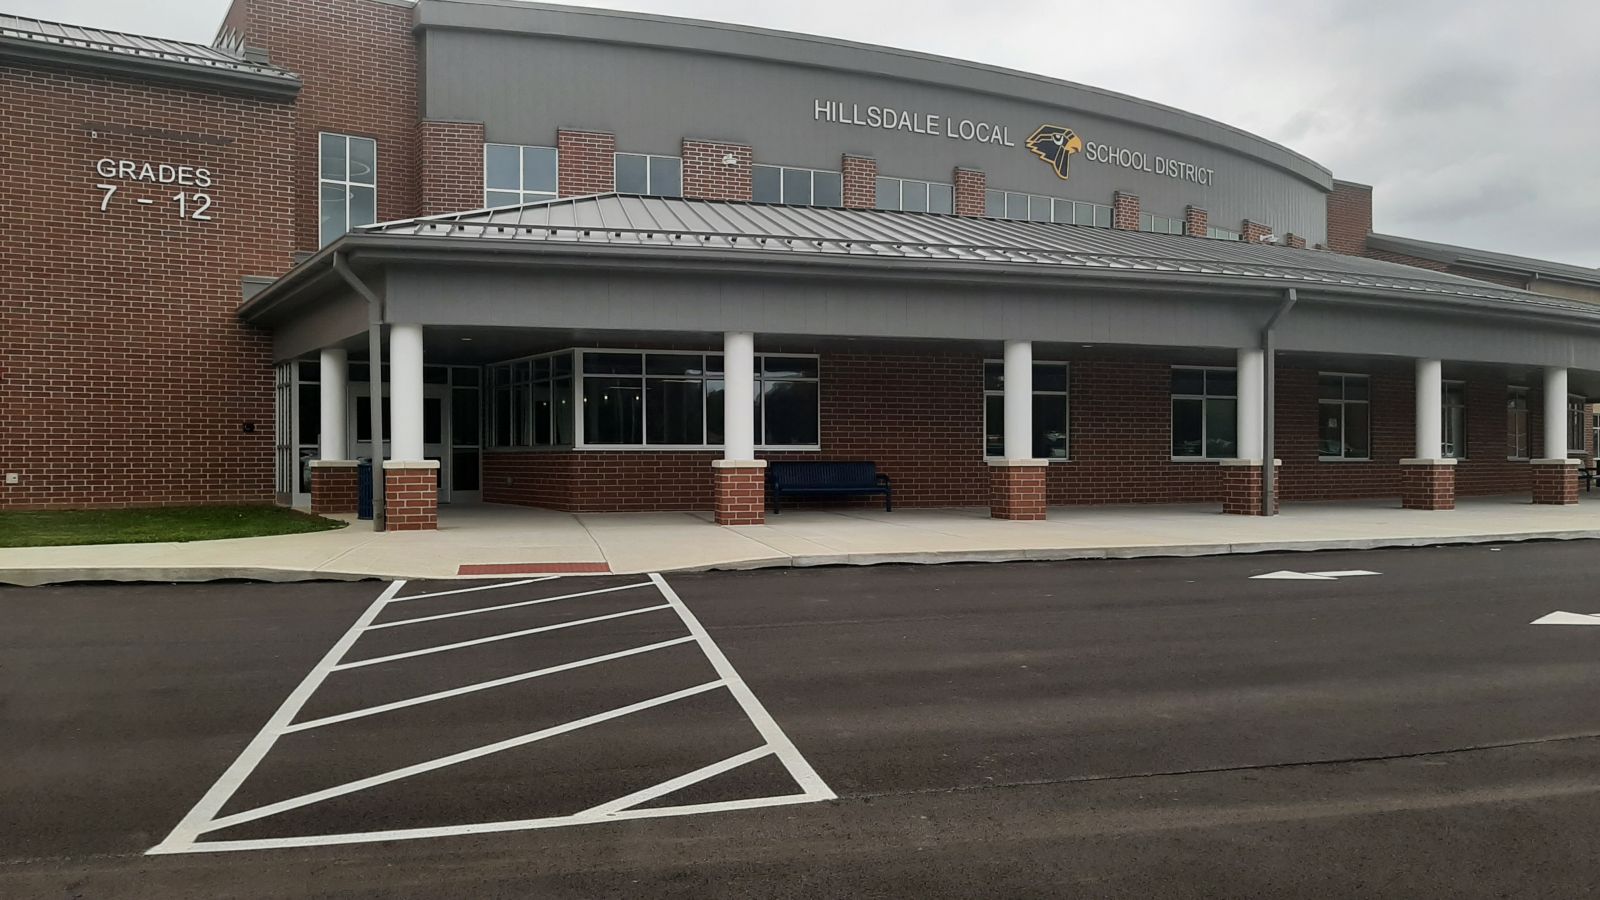 An image of the 7-12 side of the building with the crosswalk painted on the parking lot surface.